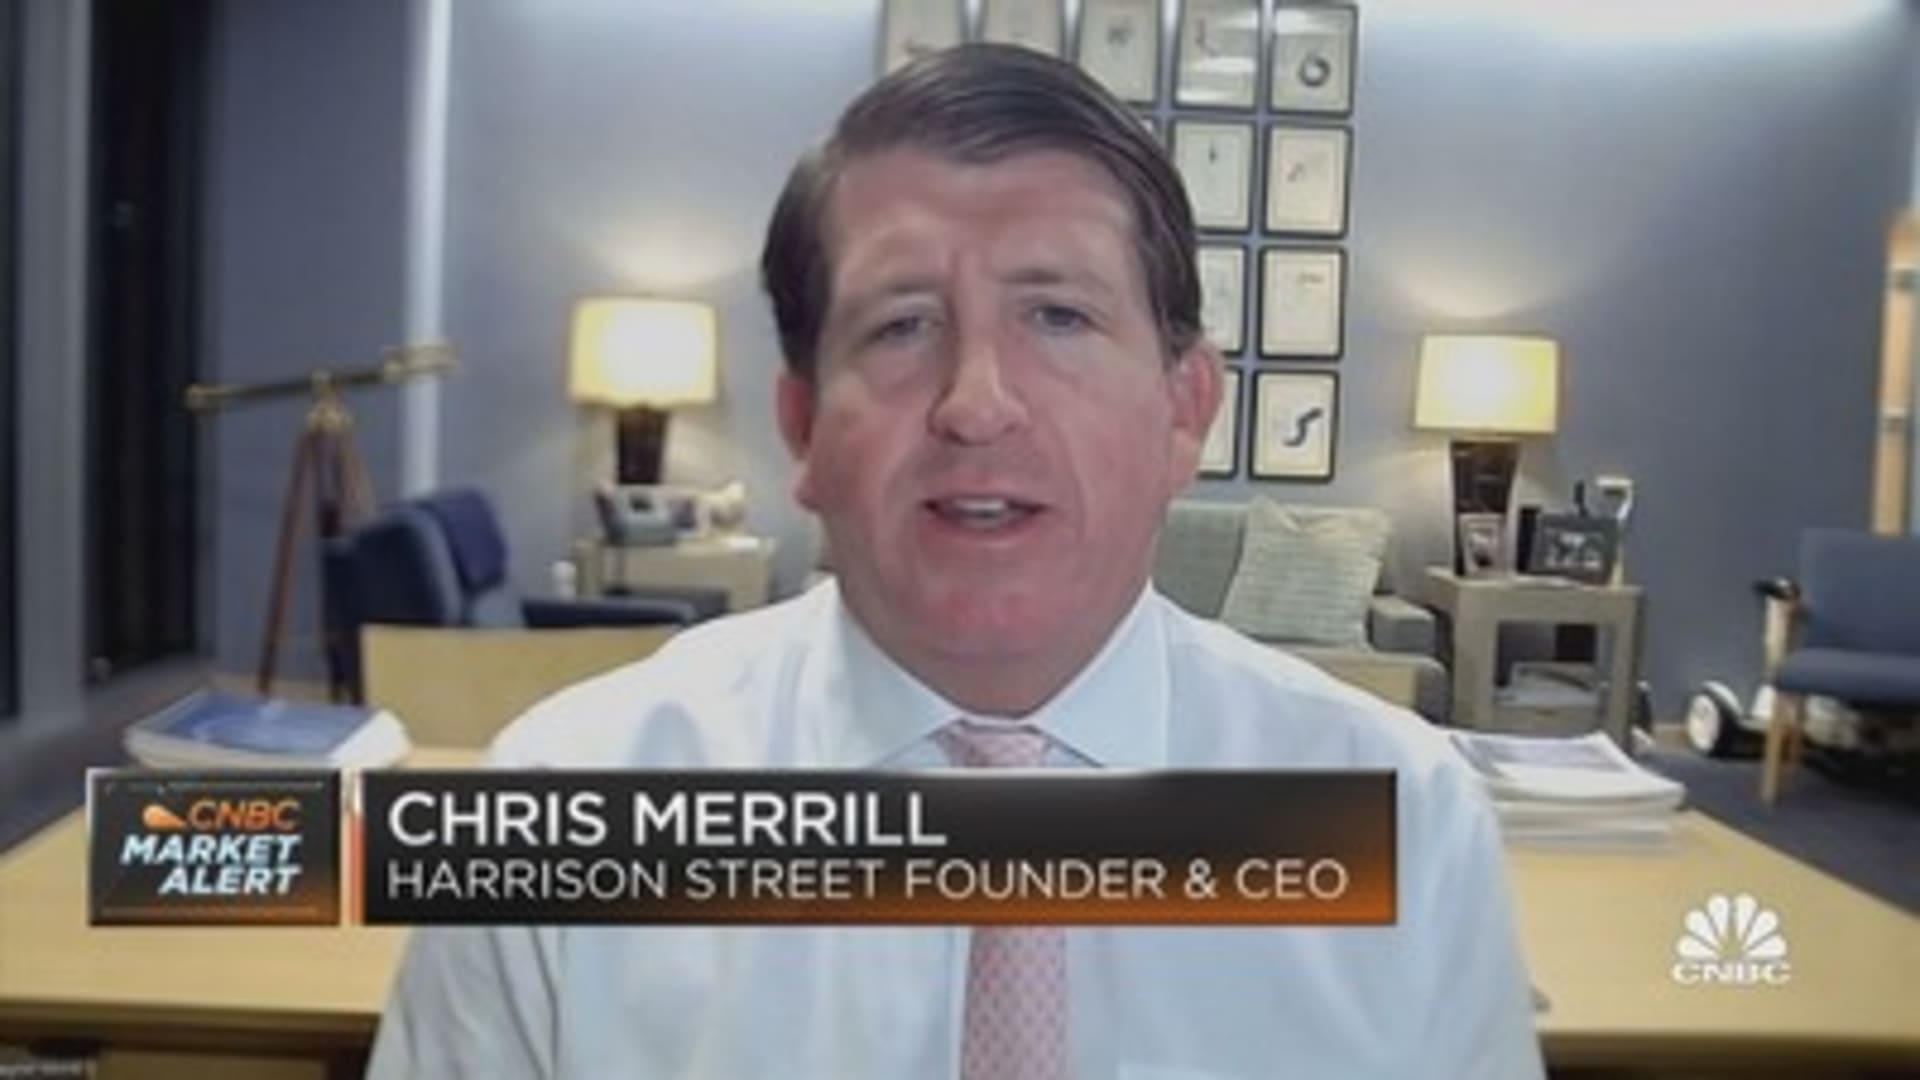 Merrill: There's extreme investor interest in need-based assets